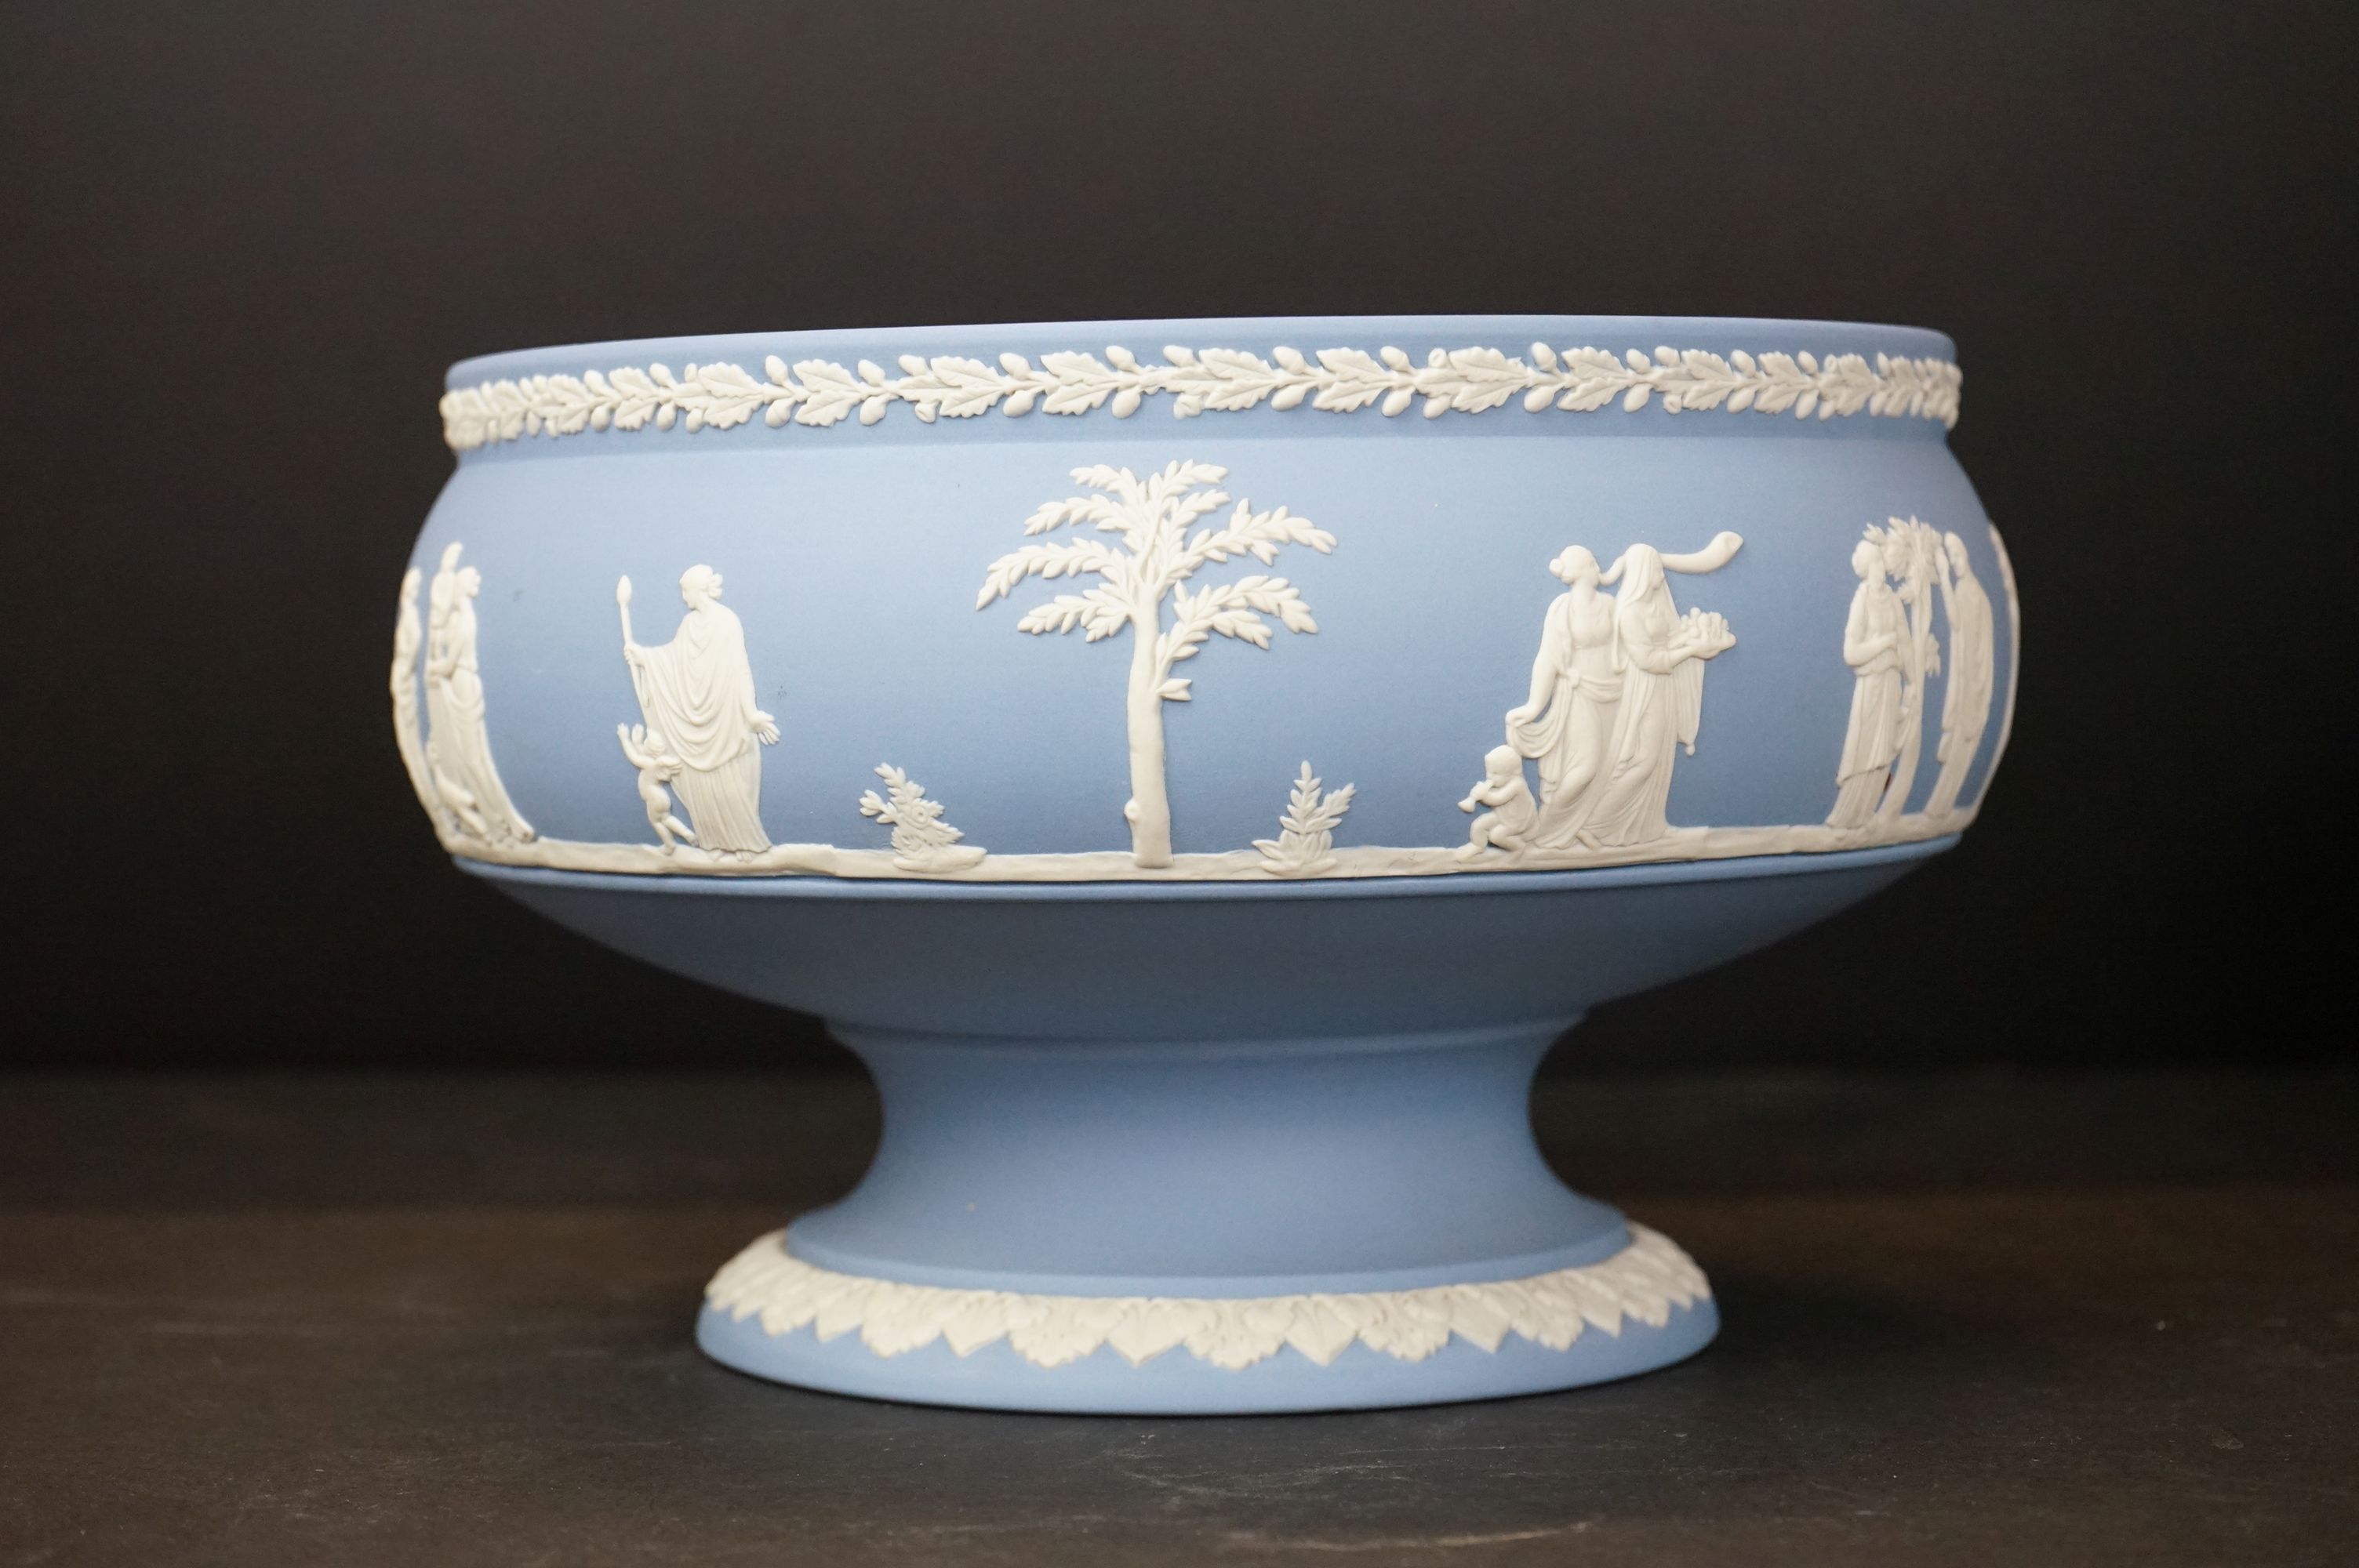 Quantity of Wedgwood Jasperware - to include a quartz mantle clock, bowl, tazza, a pair of - Image 8 of 8